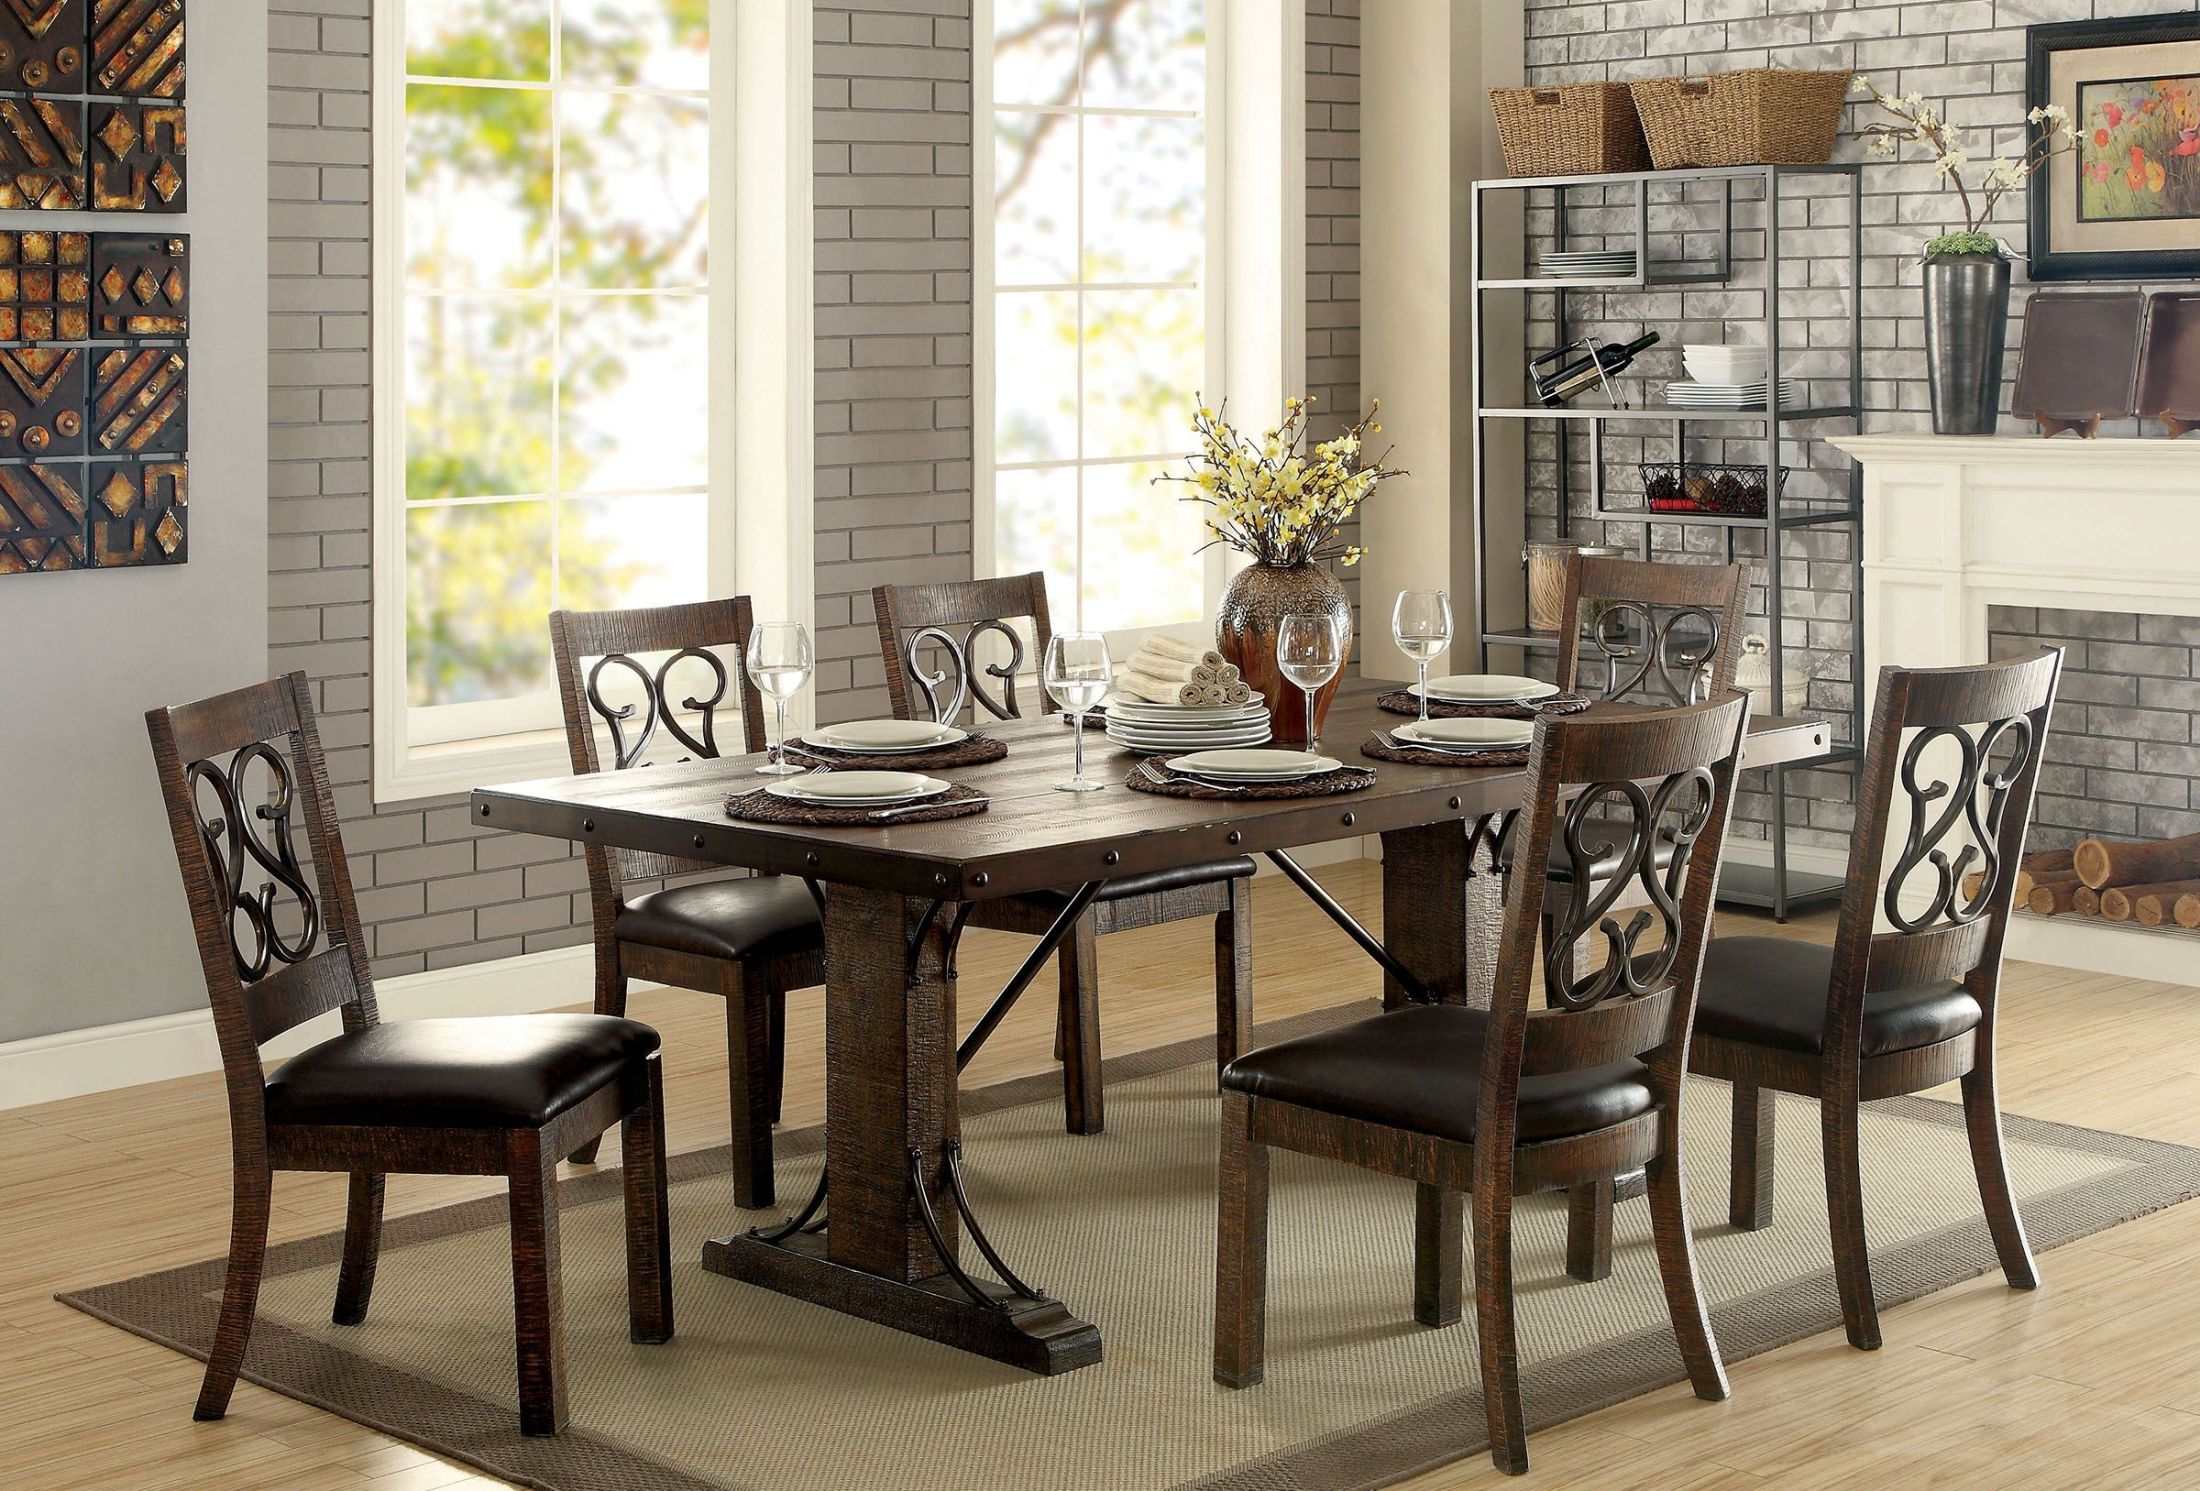 Rustic Dining Room Set With Bench